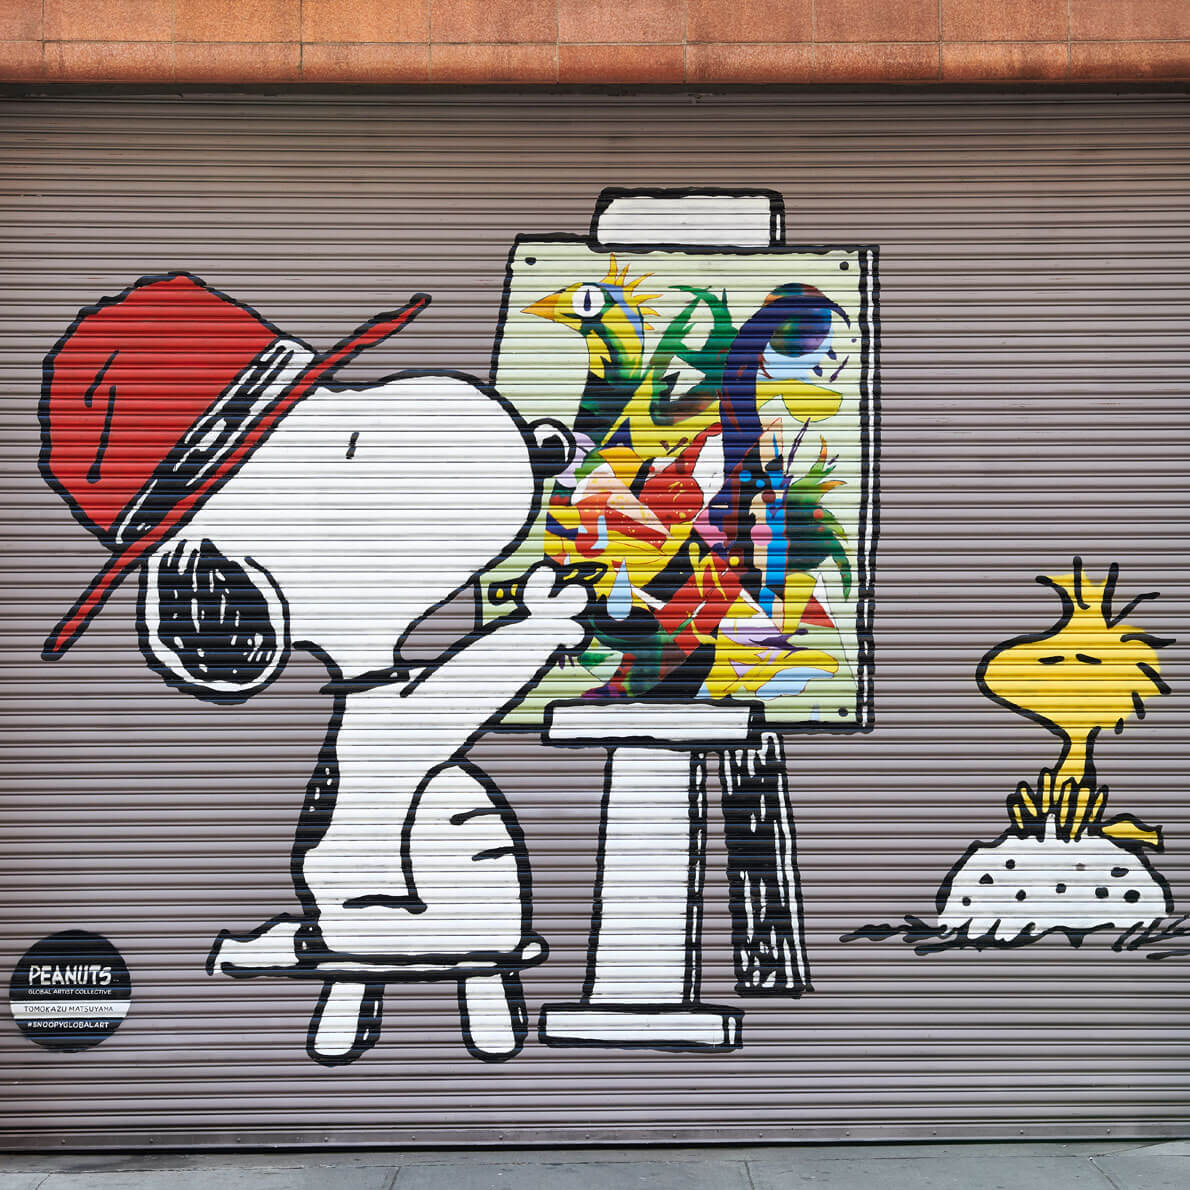 A black and white dog sitting on a chair, wearing a red hat and painting a picture. 